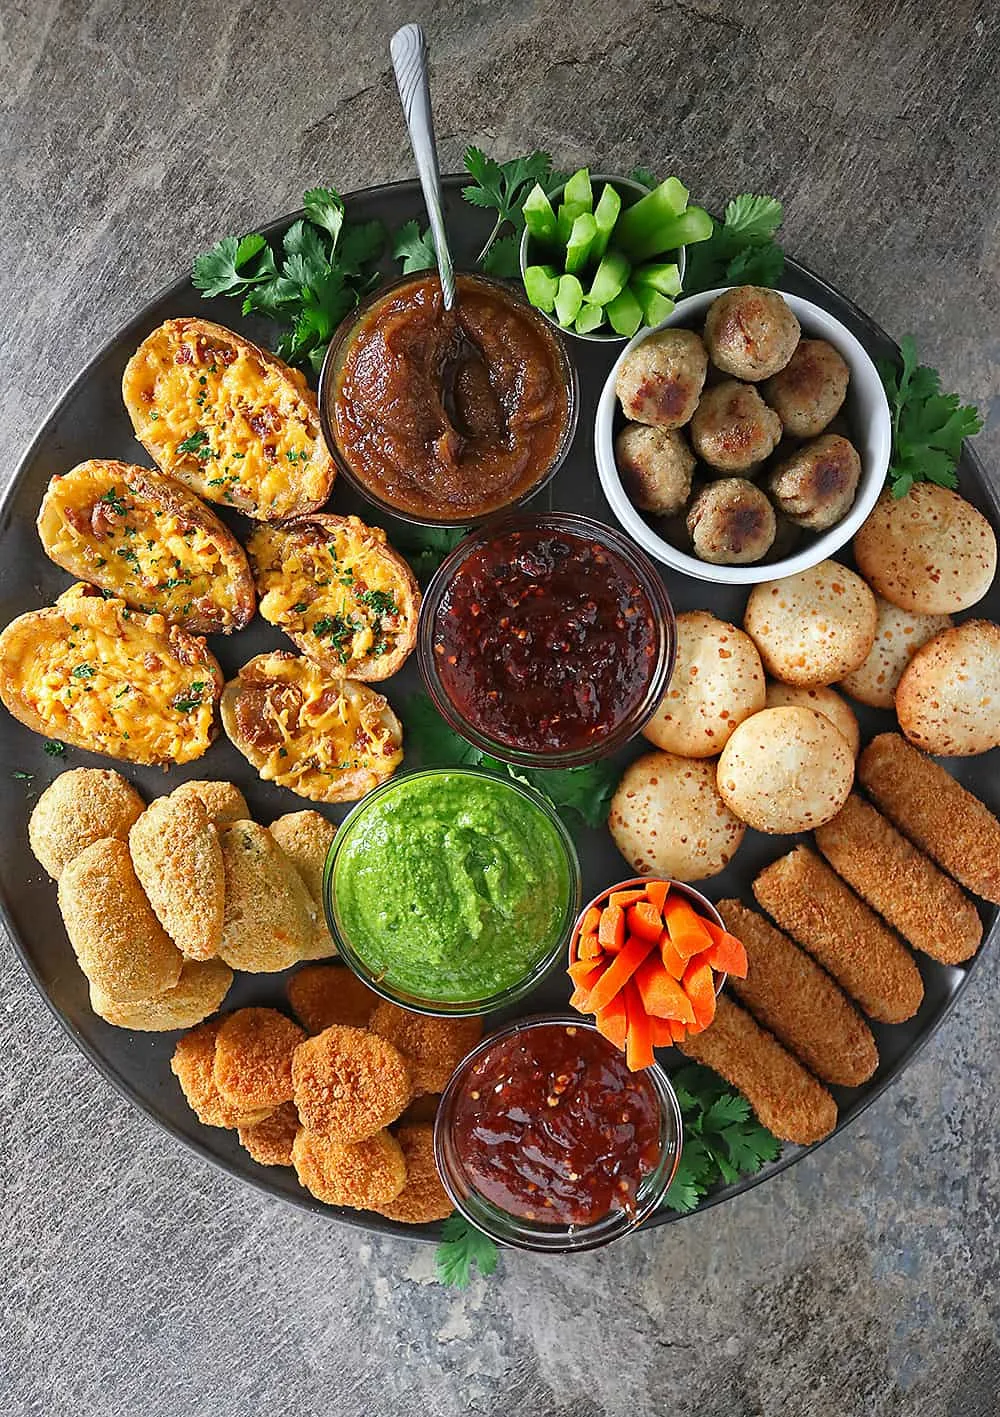 FarmRich Game Day Snacking Platter With Spicy Sauces.